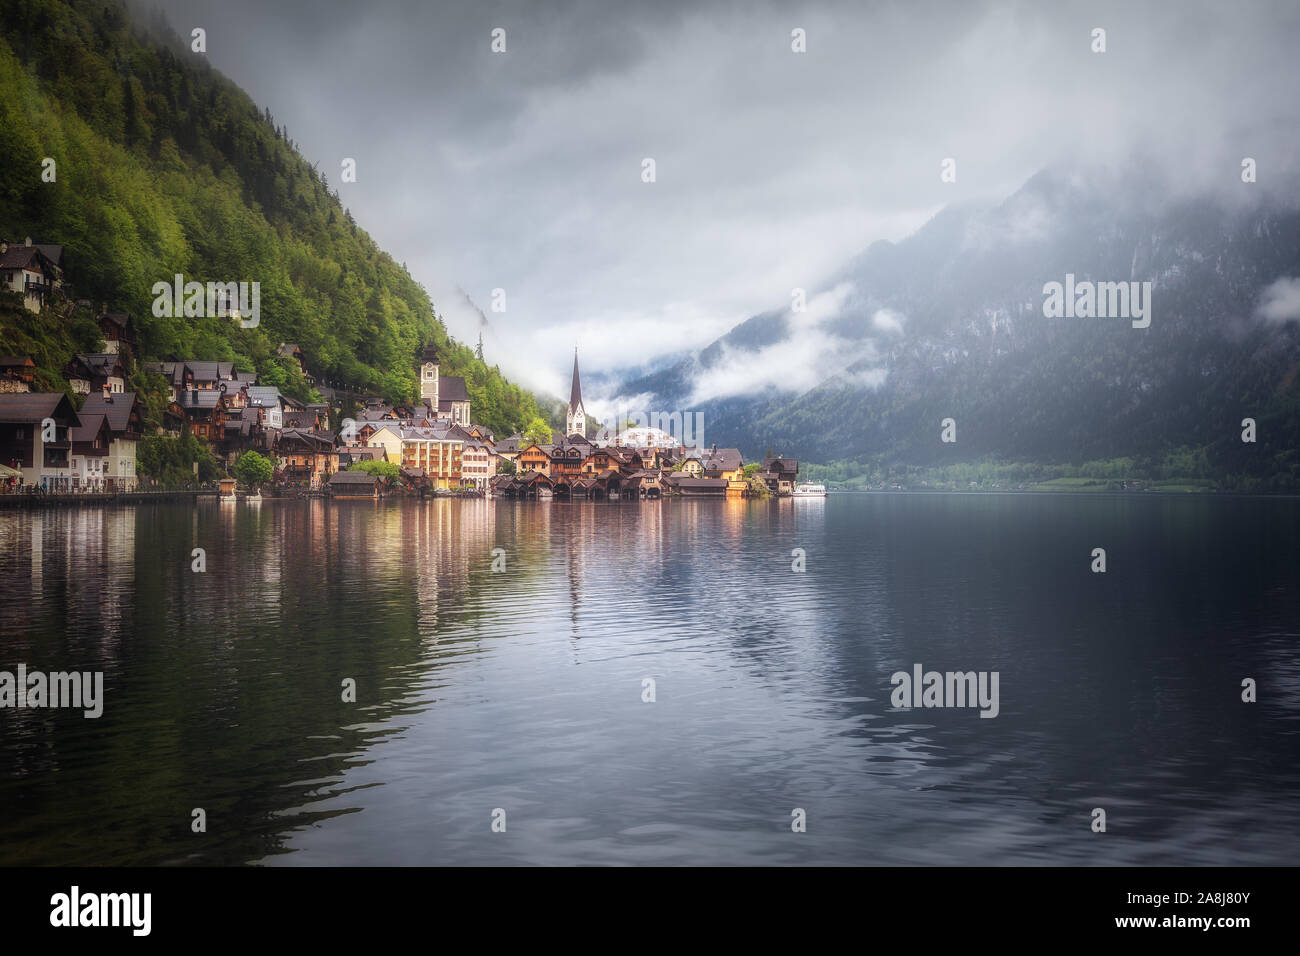 Cloudy day in Hallstatt. Reflection on the lake. Beautiful village in Austria. Stock Photo